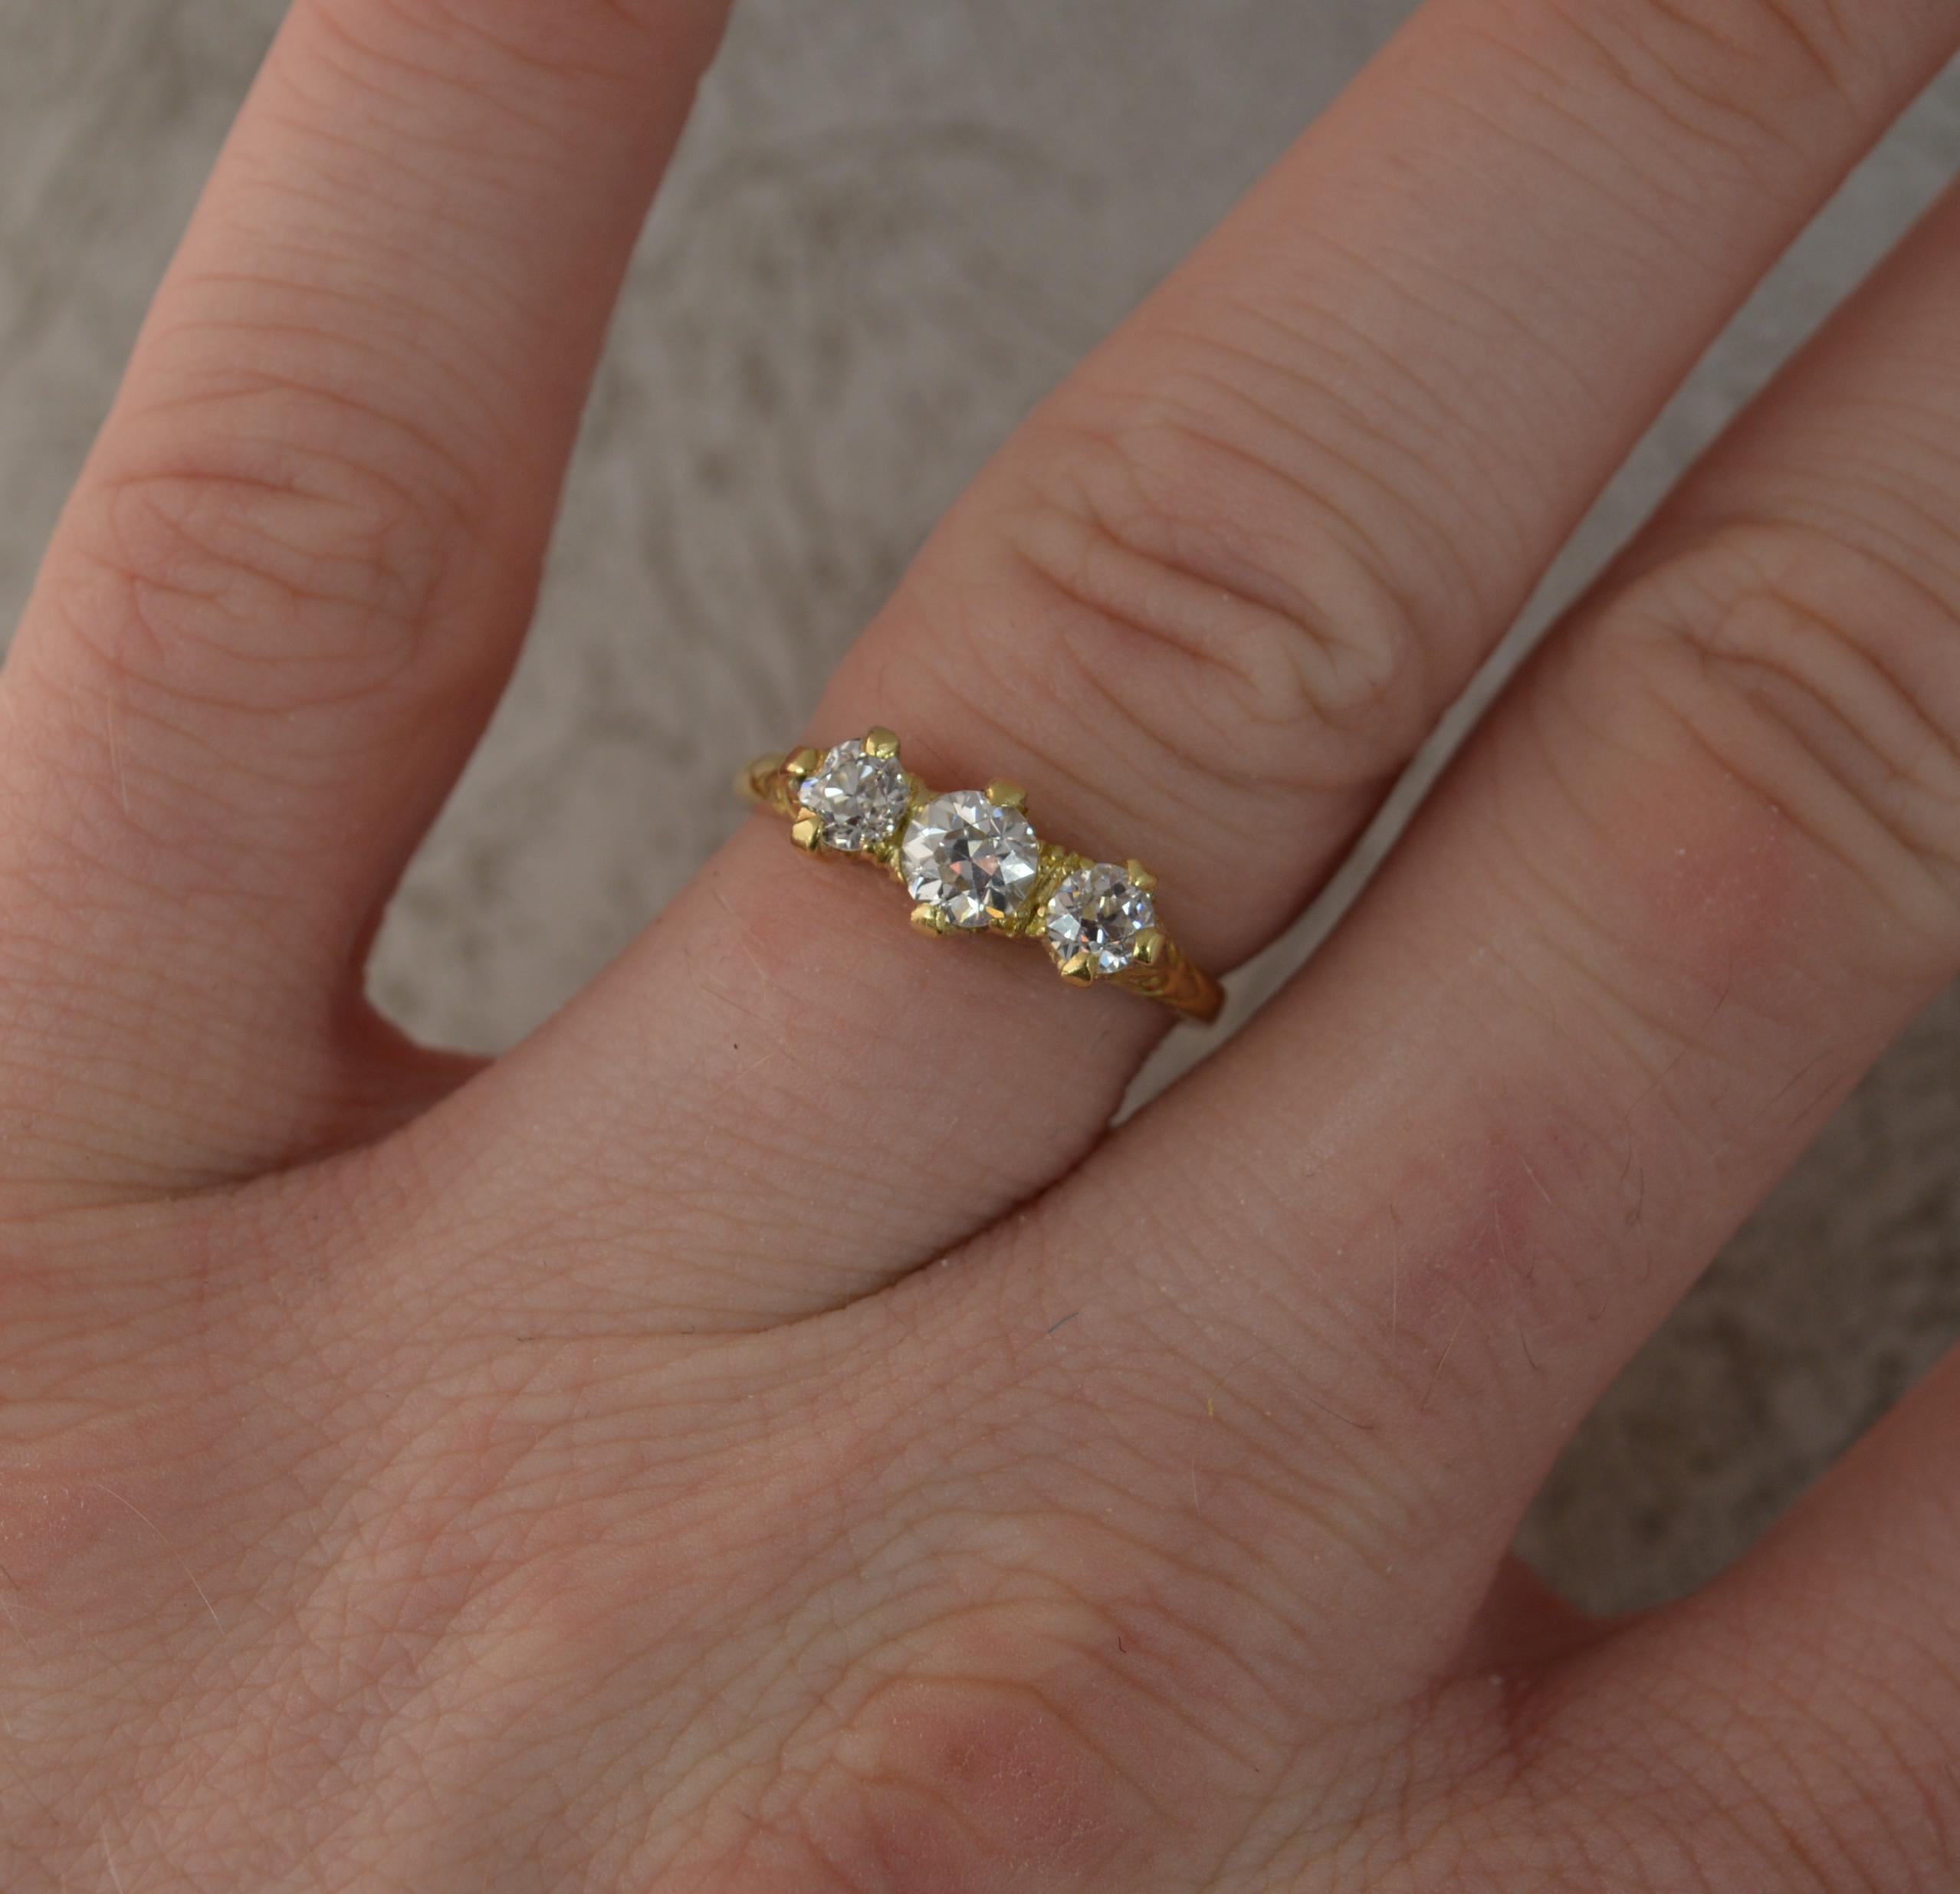 An antique diamond trilogy ring.
Solid 18 carat yellow gold example.
Designed with three natural old European cut diamonds to total 0.75 carats. Very white, bright and sparkly.
Claw set design trilogy.
13mm spread of stones. Protruding 3.5mm off the